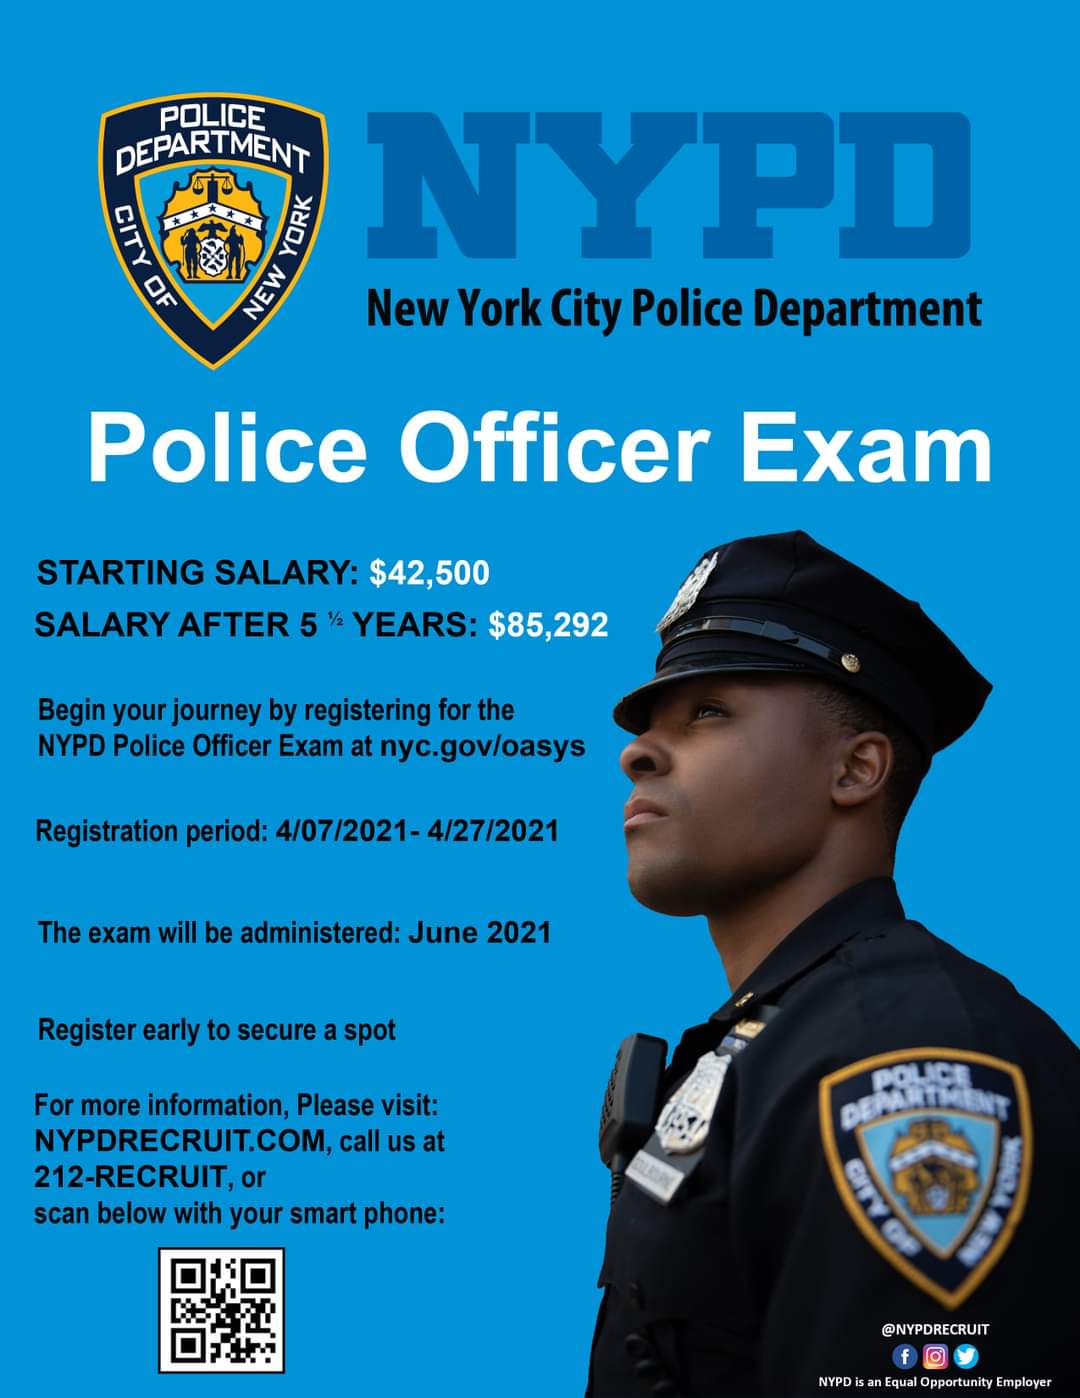 NYPD Police Officer Exam